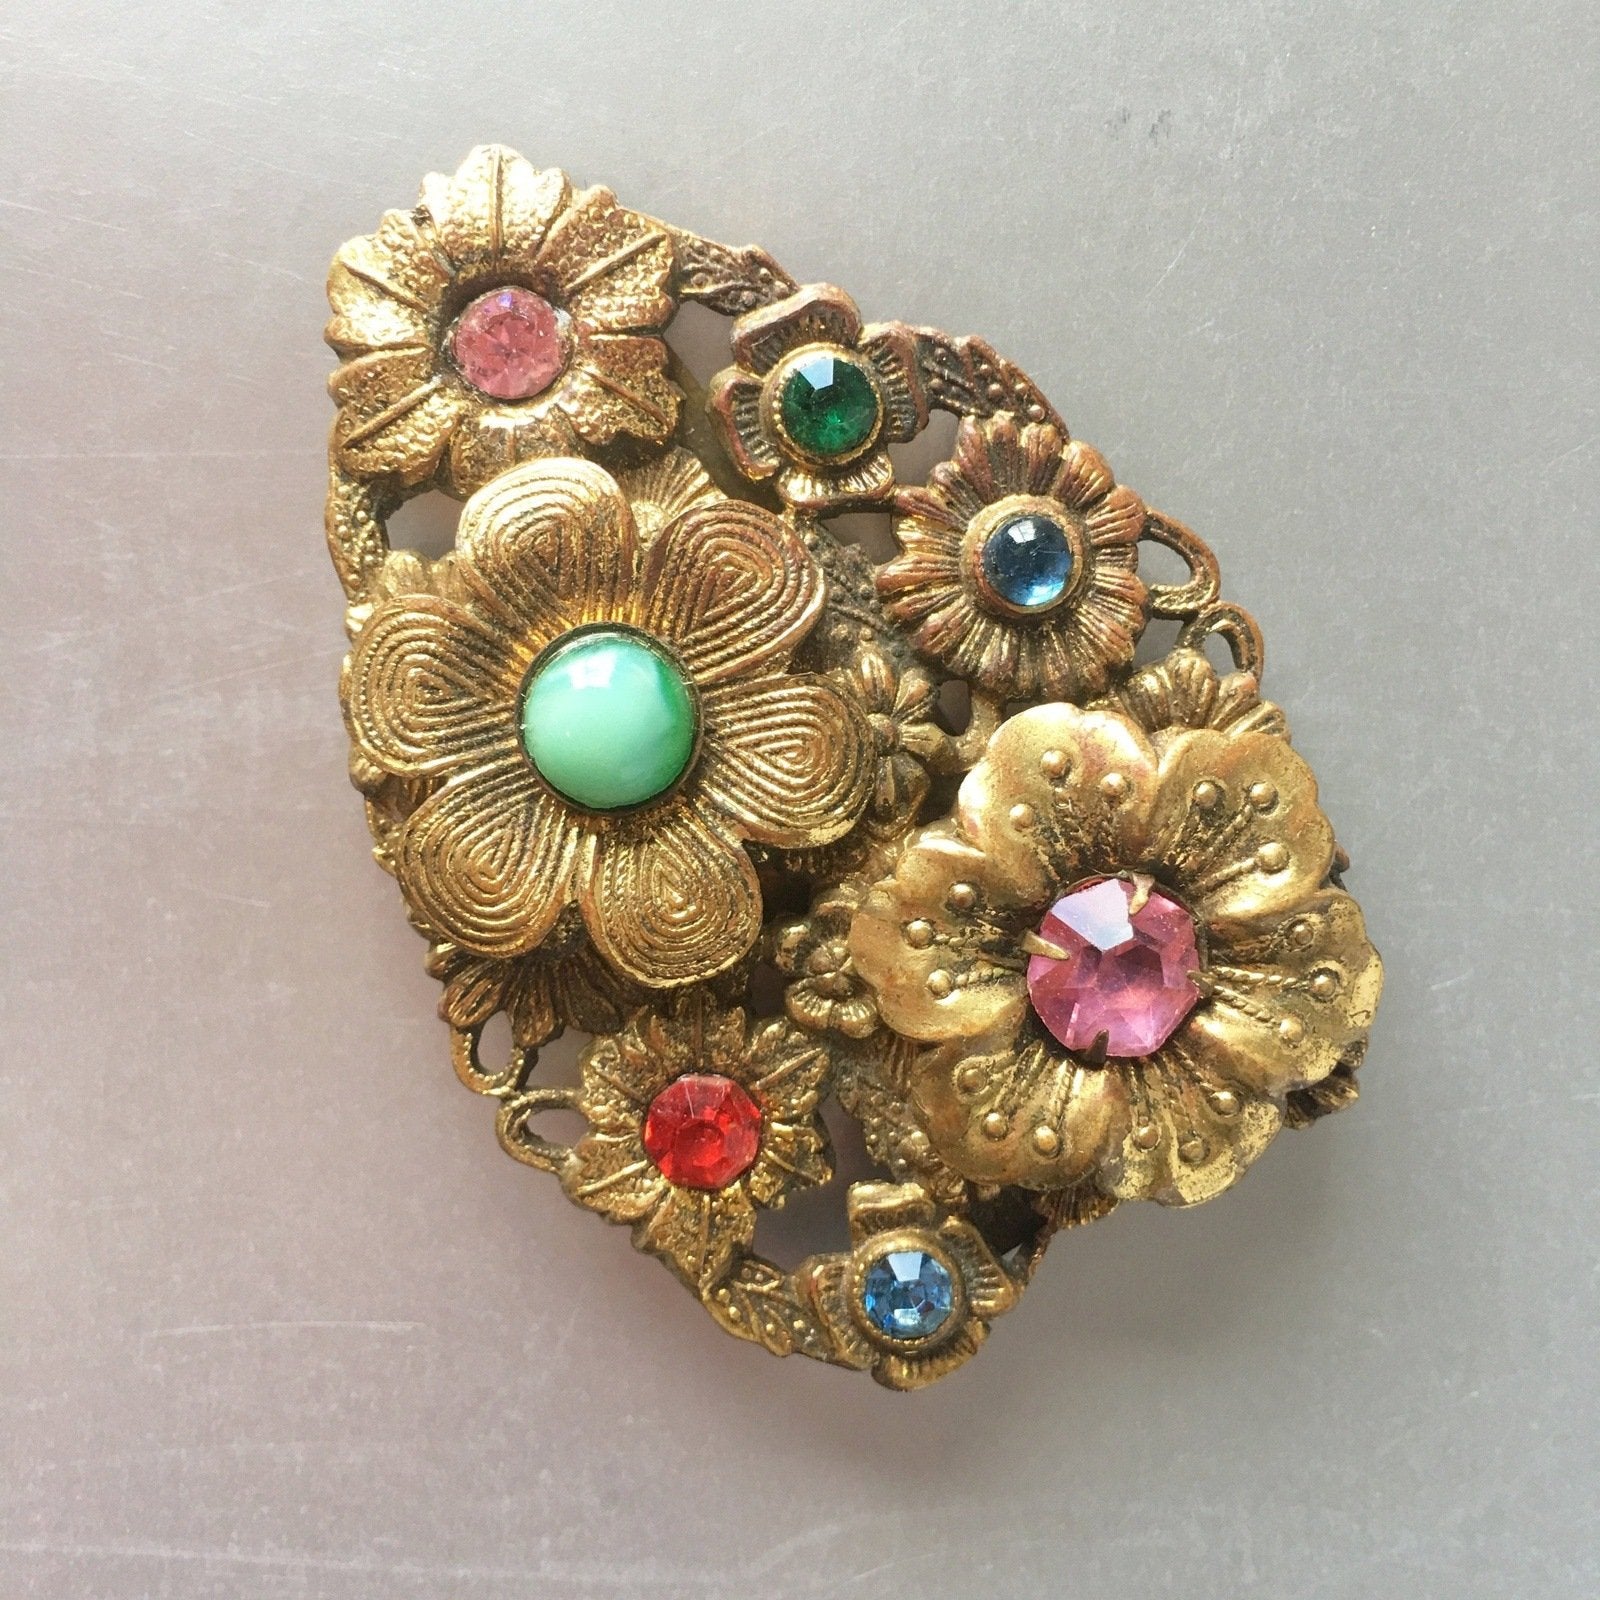 Colorful Floral Dress Clip Antique Pin Vintage Jewelry